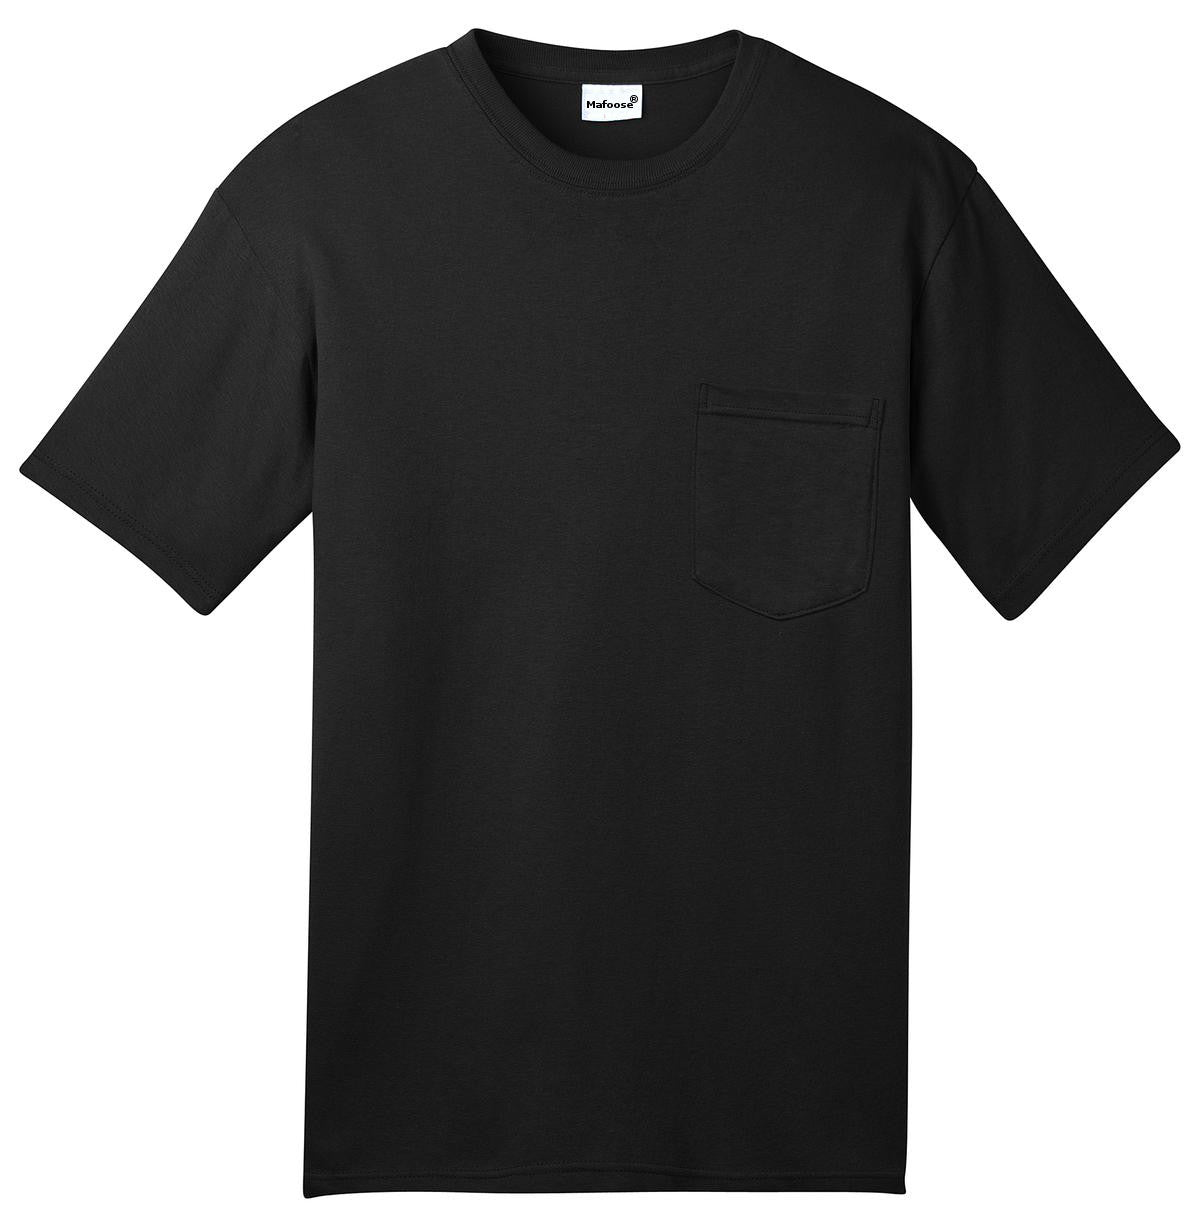 Mafoose Men's All American Tee Shirt with Pocket Black-Front